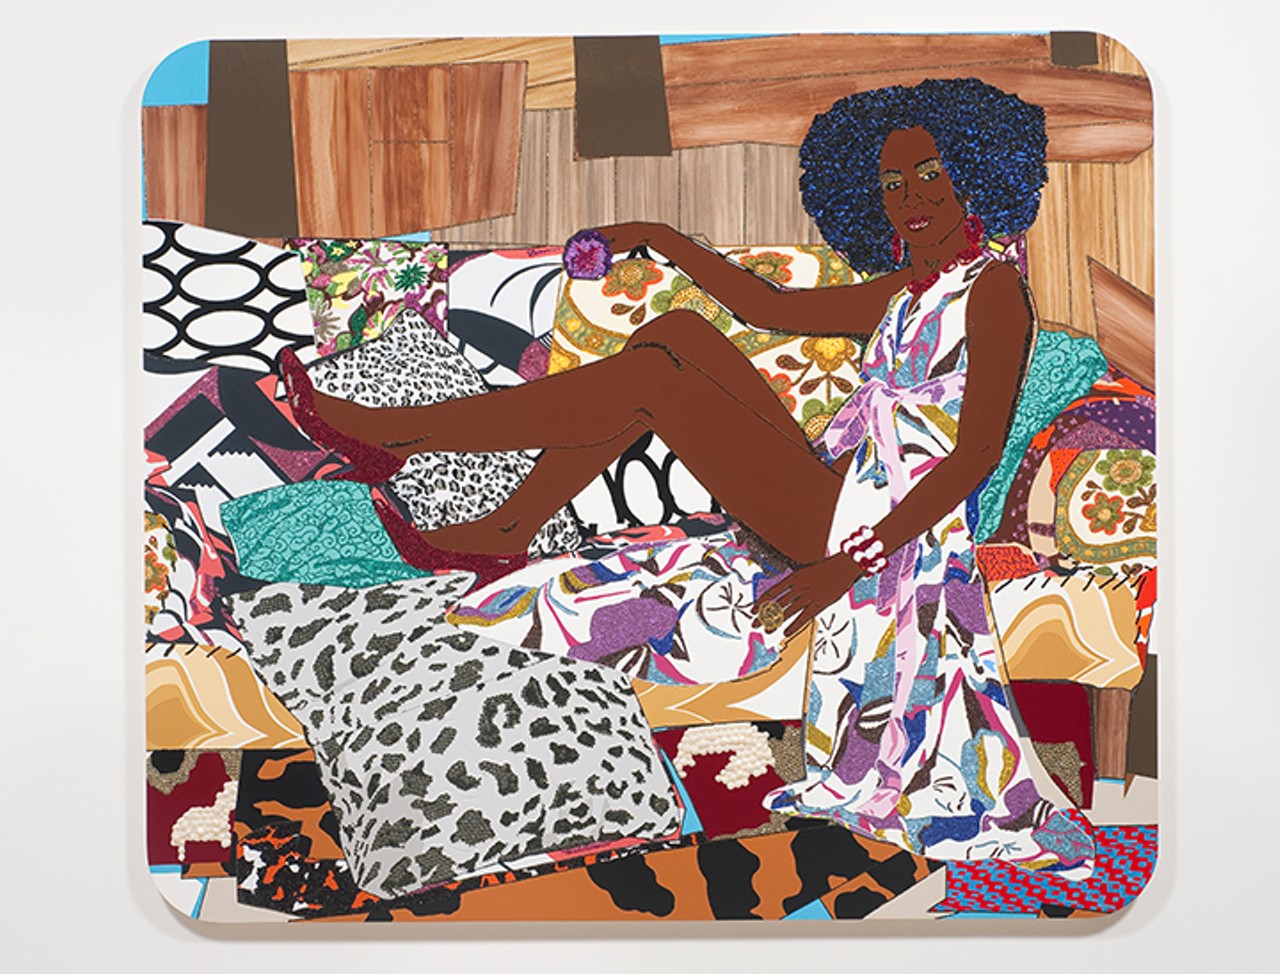 Opens Friday, Oct. 19Shifting Gaze: A Reconstruction of The Black & Hispanic Body in Contemporary Art at the Mennello Museum of American ArtArt by Mickalene Thomas